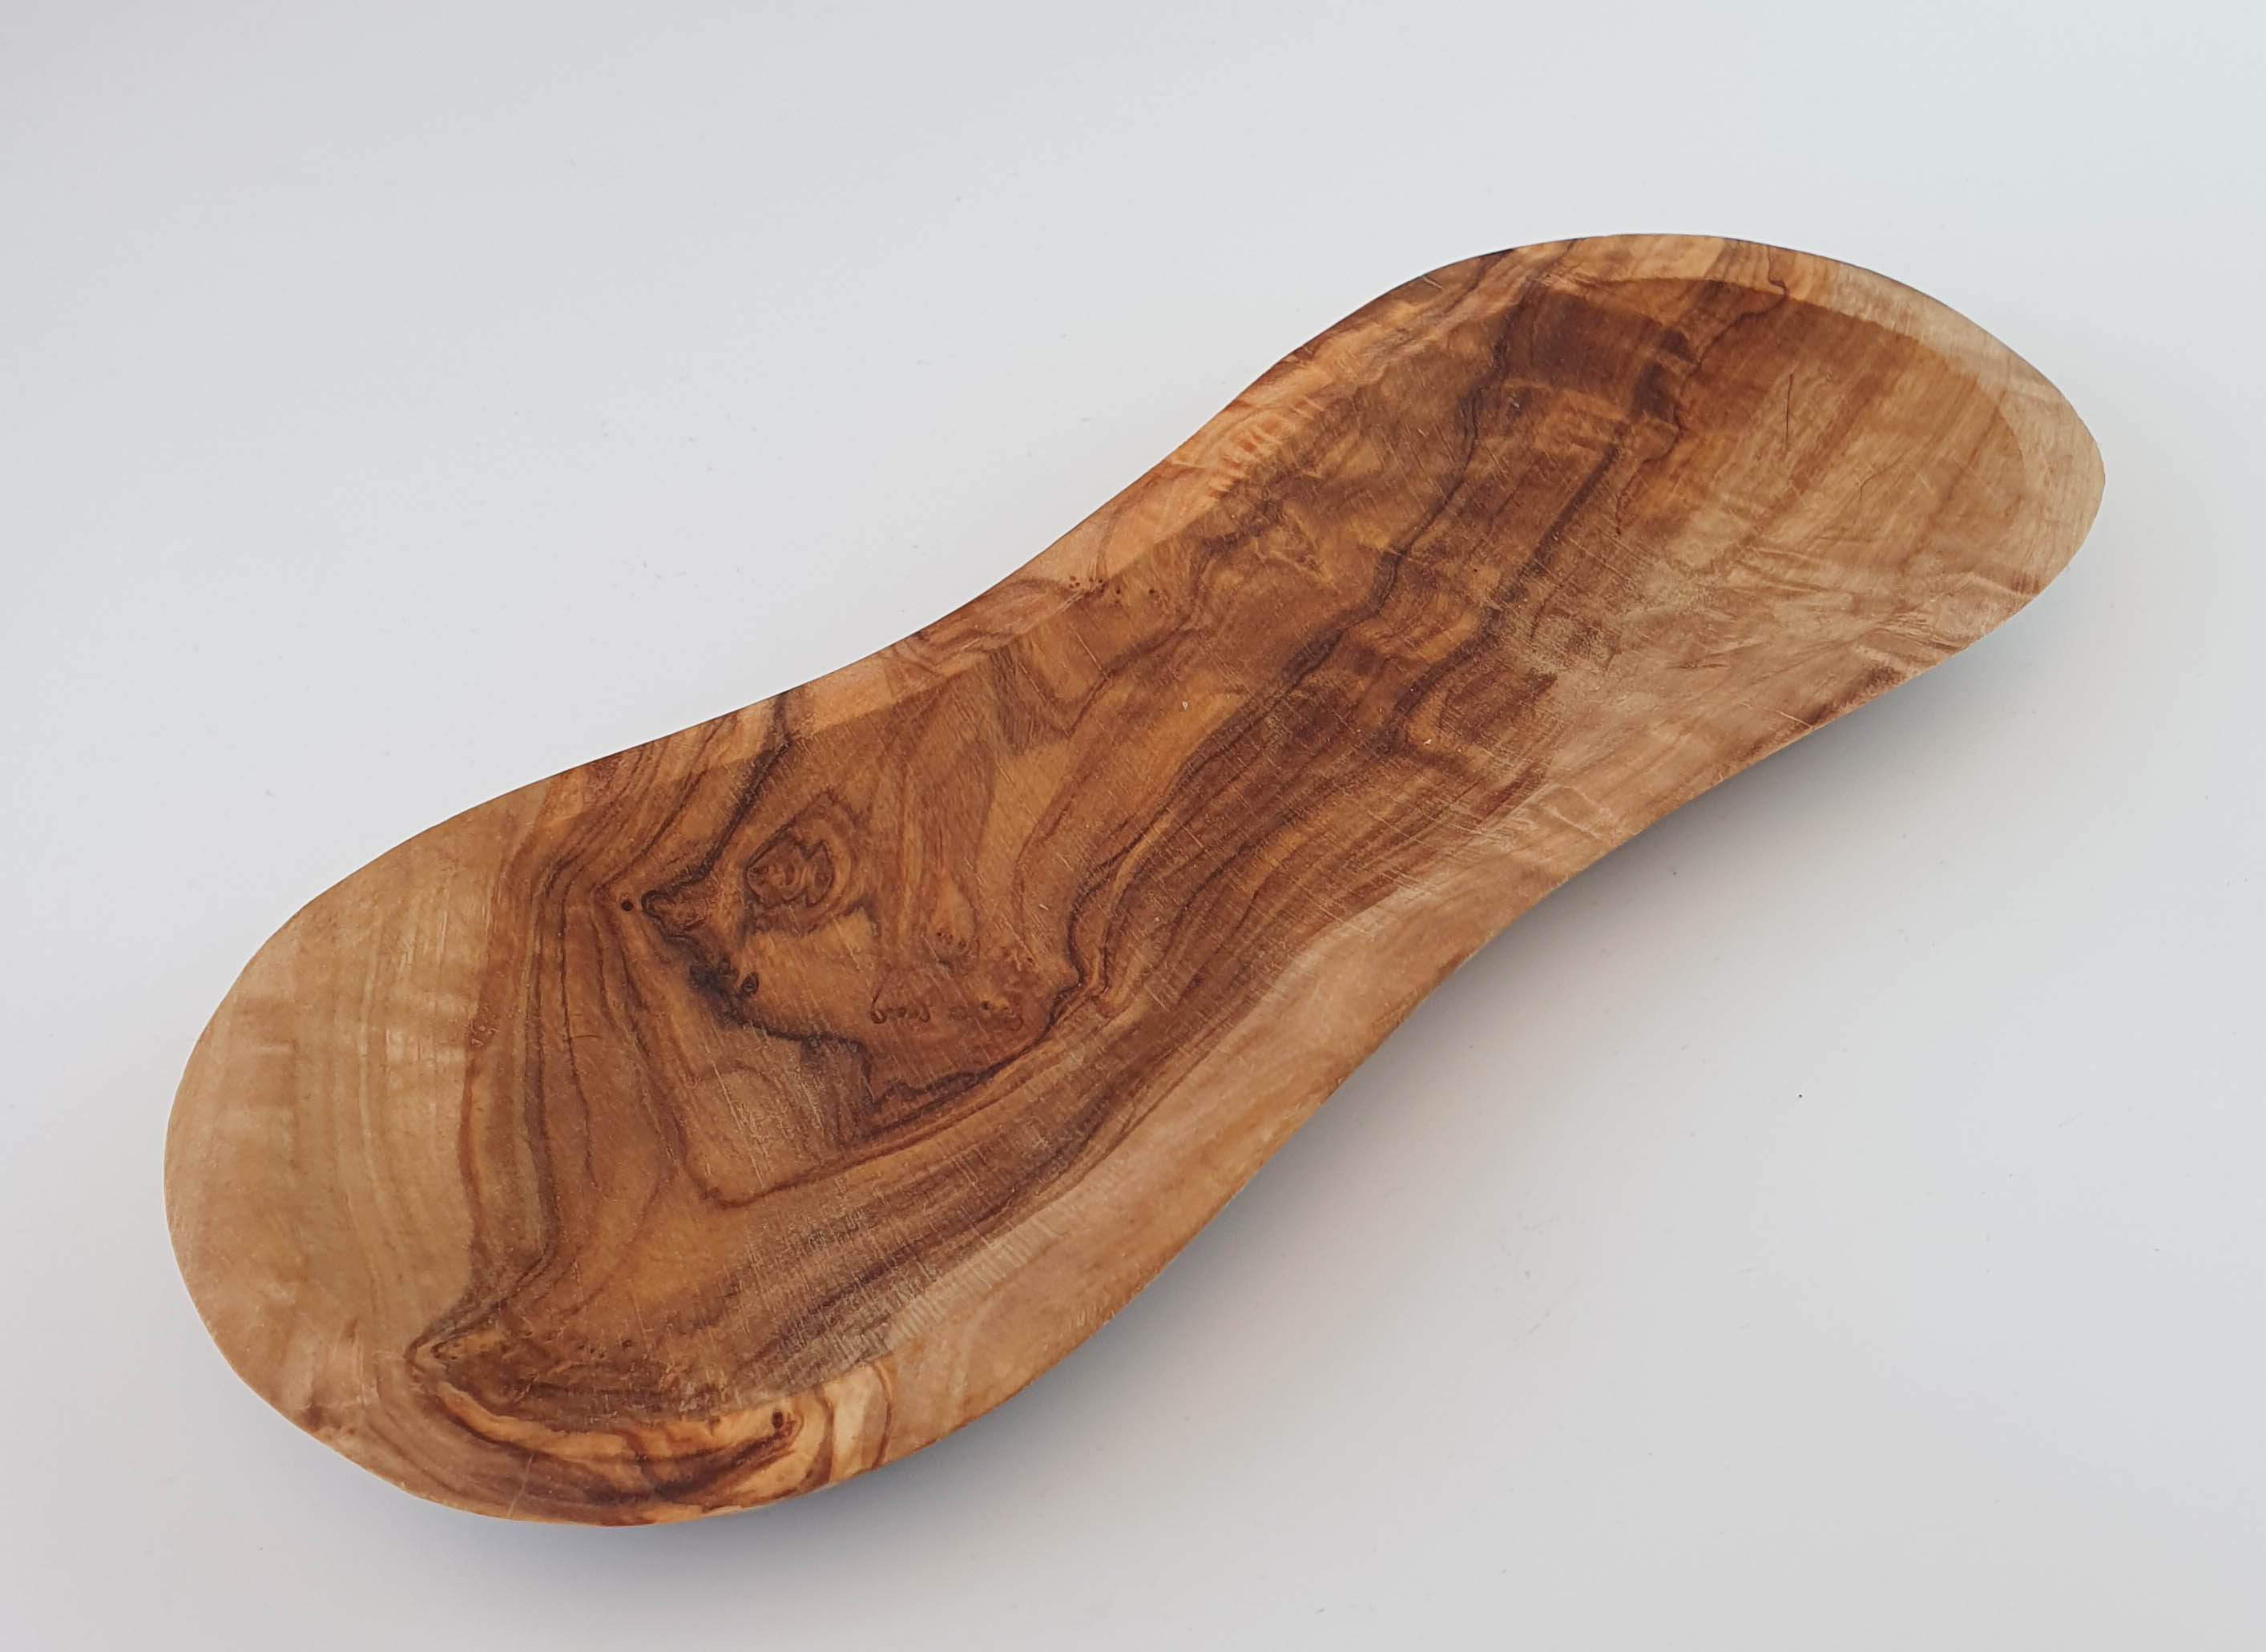 Rustic olive wood plate in the shape of a peanut, 22x9cm.